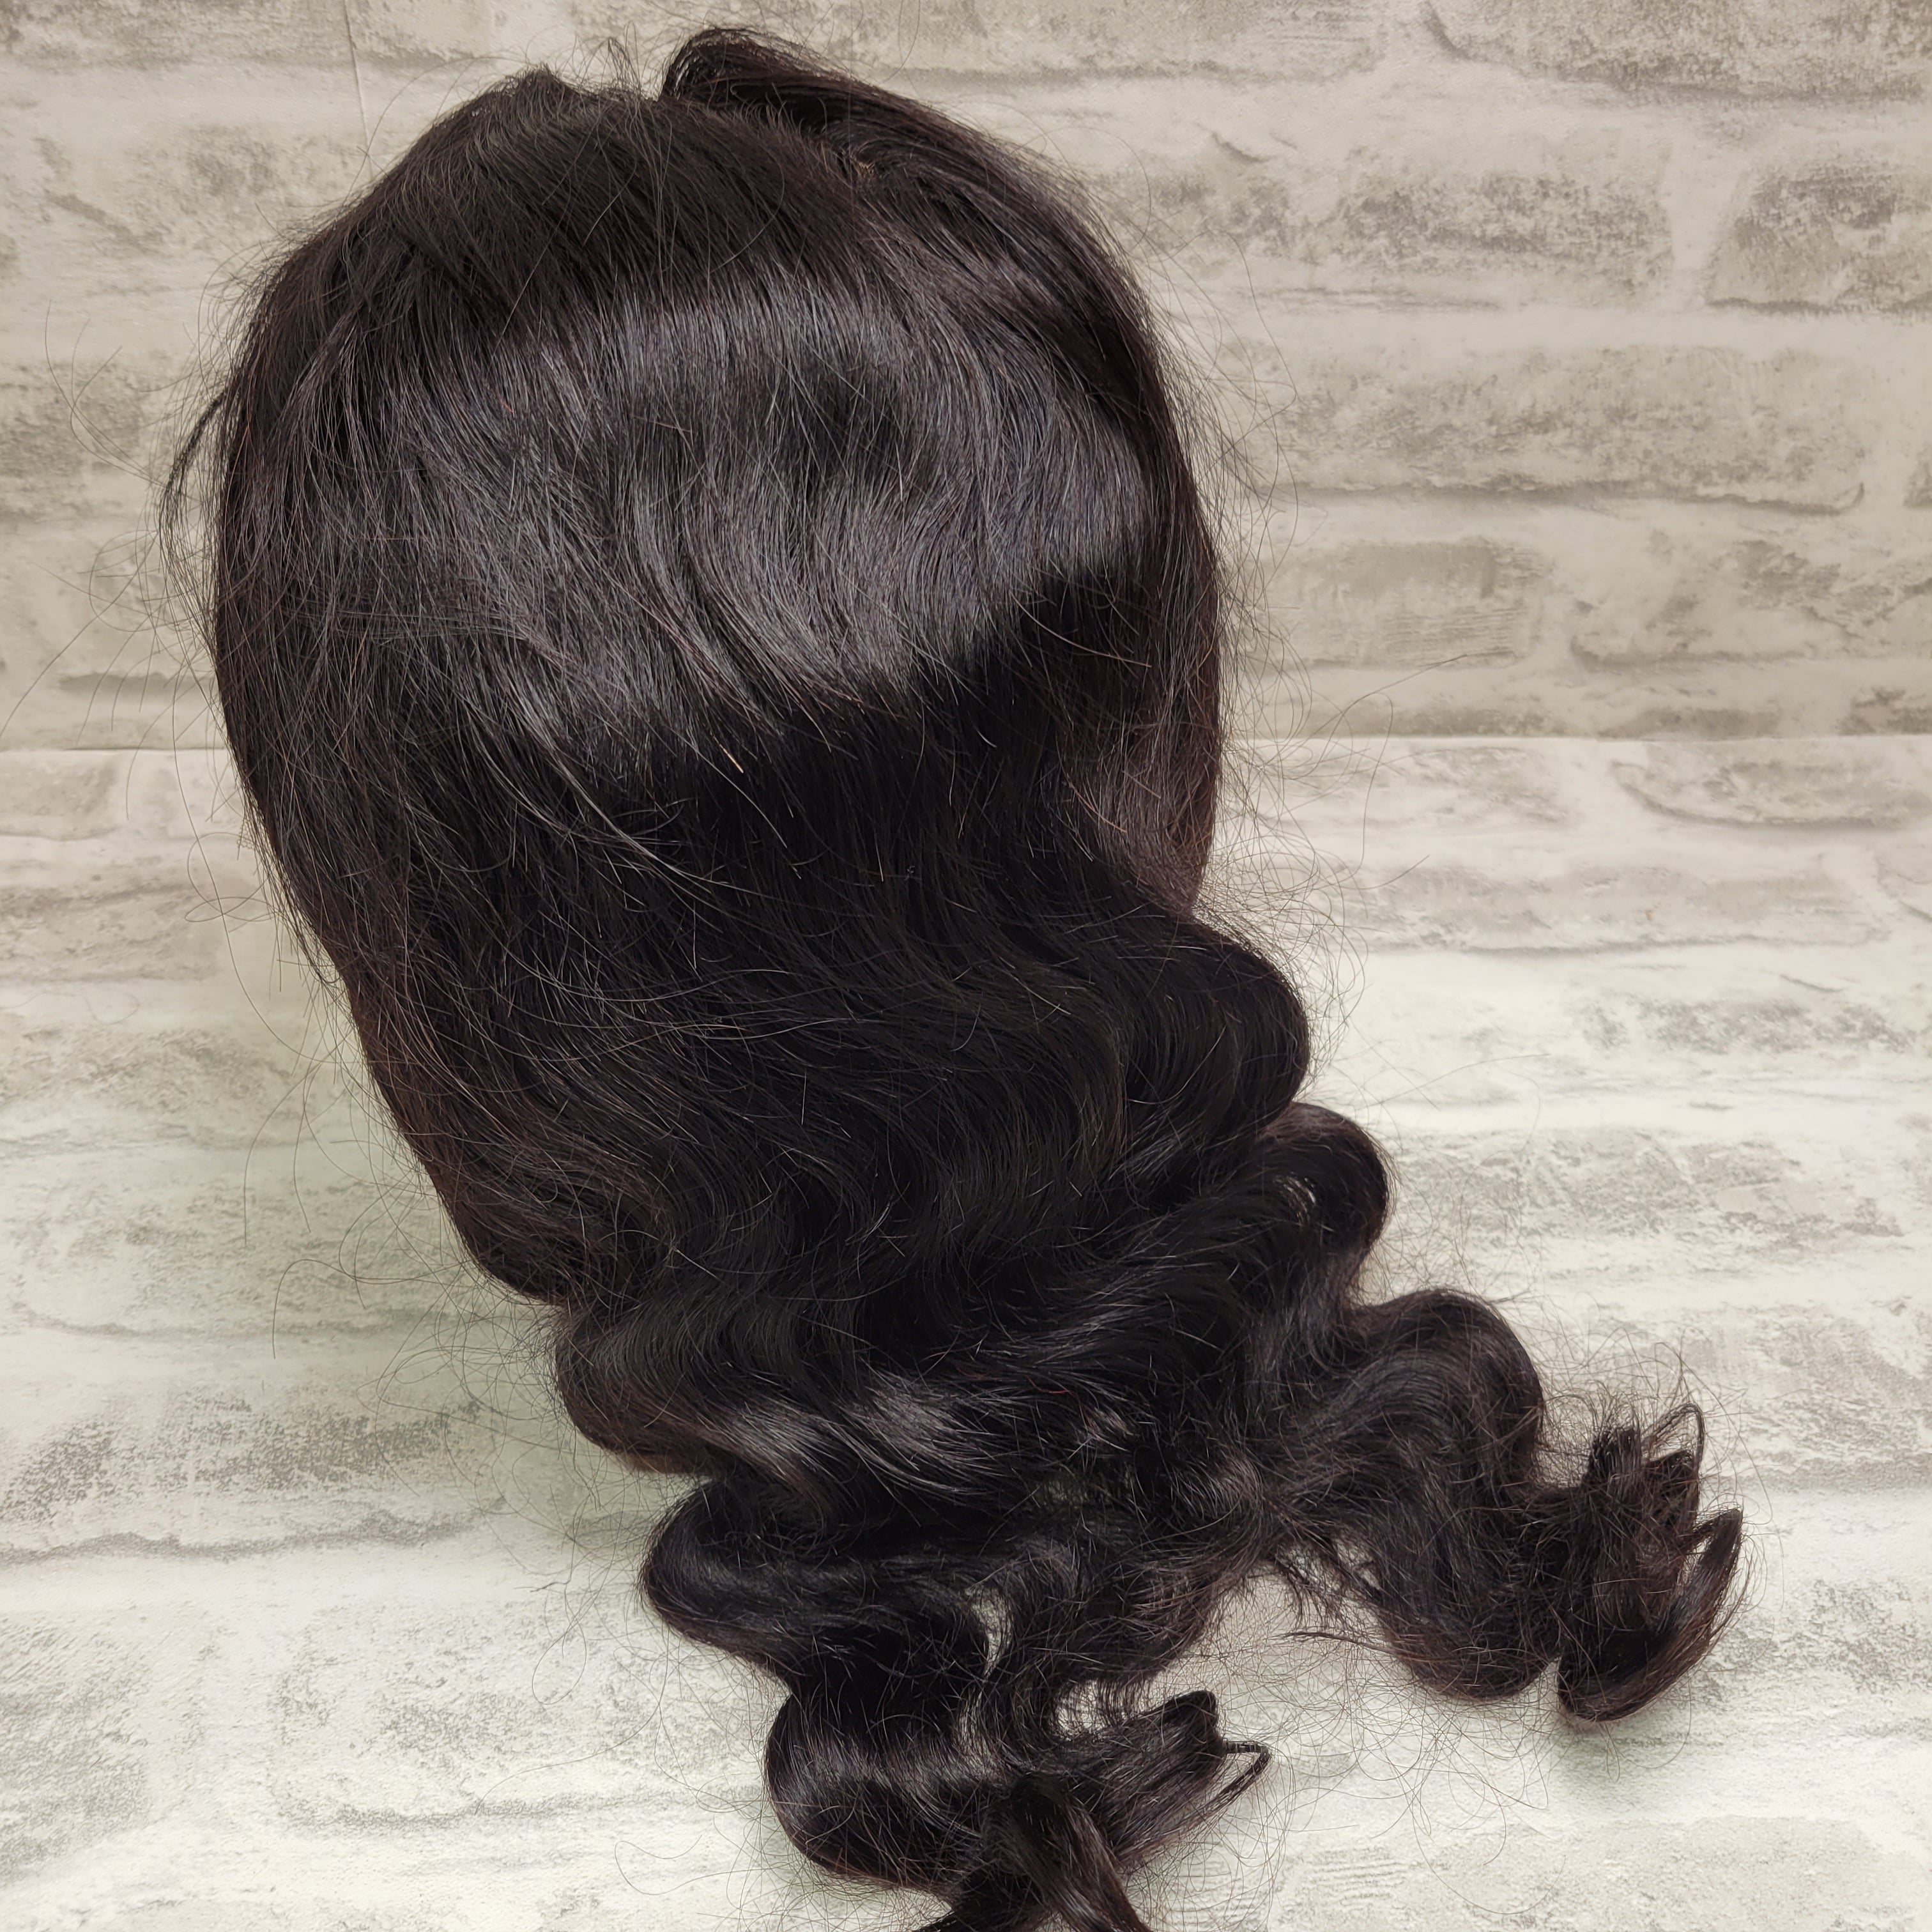 Human Hair Lace Front Wig Remy Human Hair, Body Wave, Dark Brown, 20